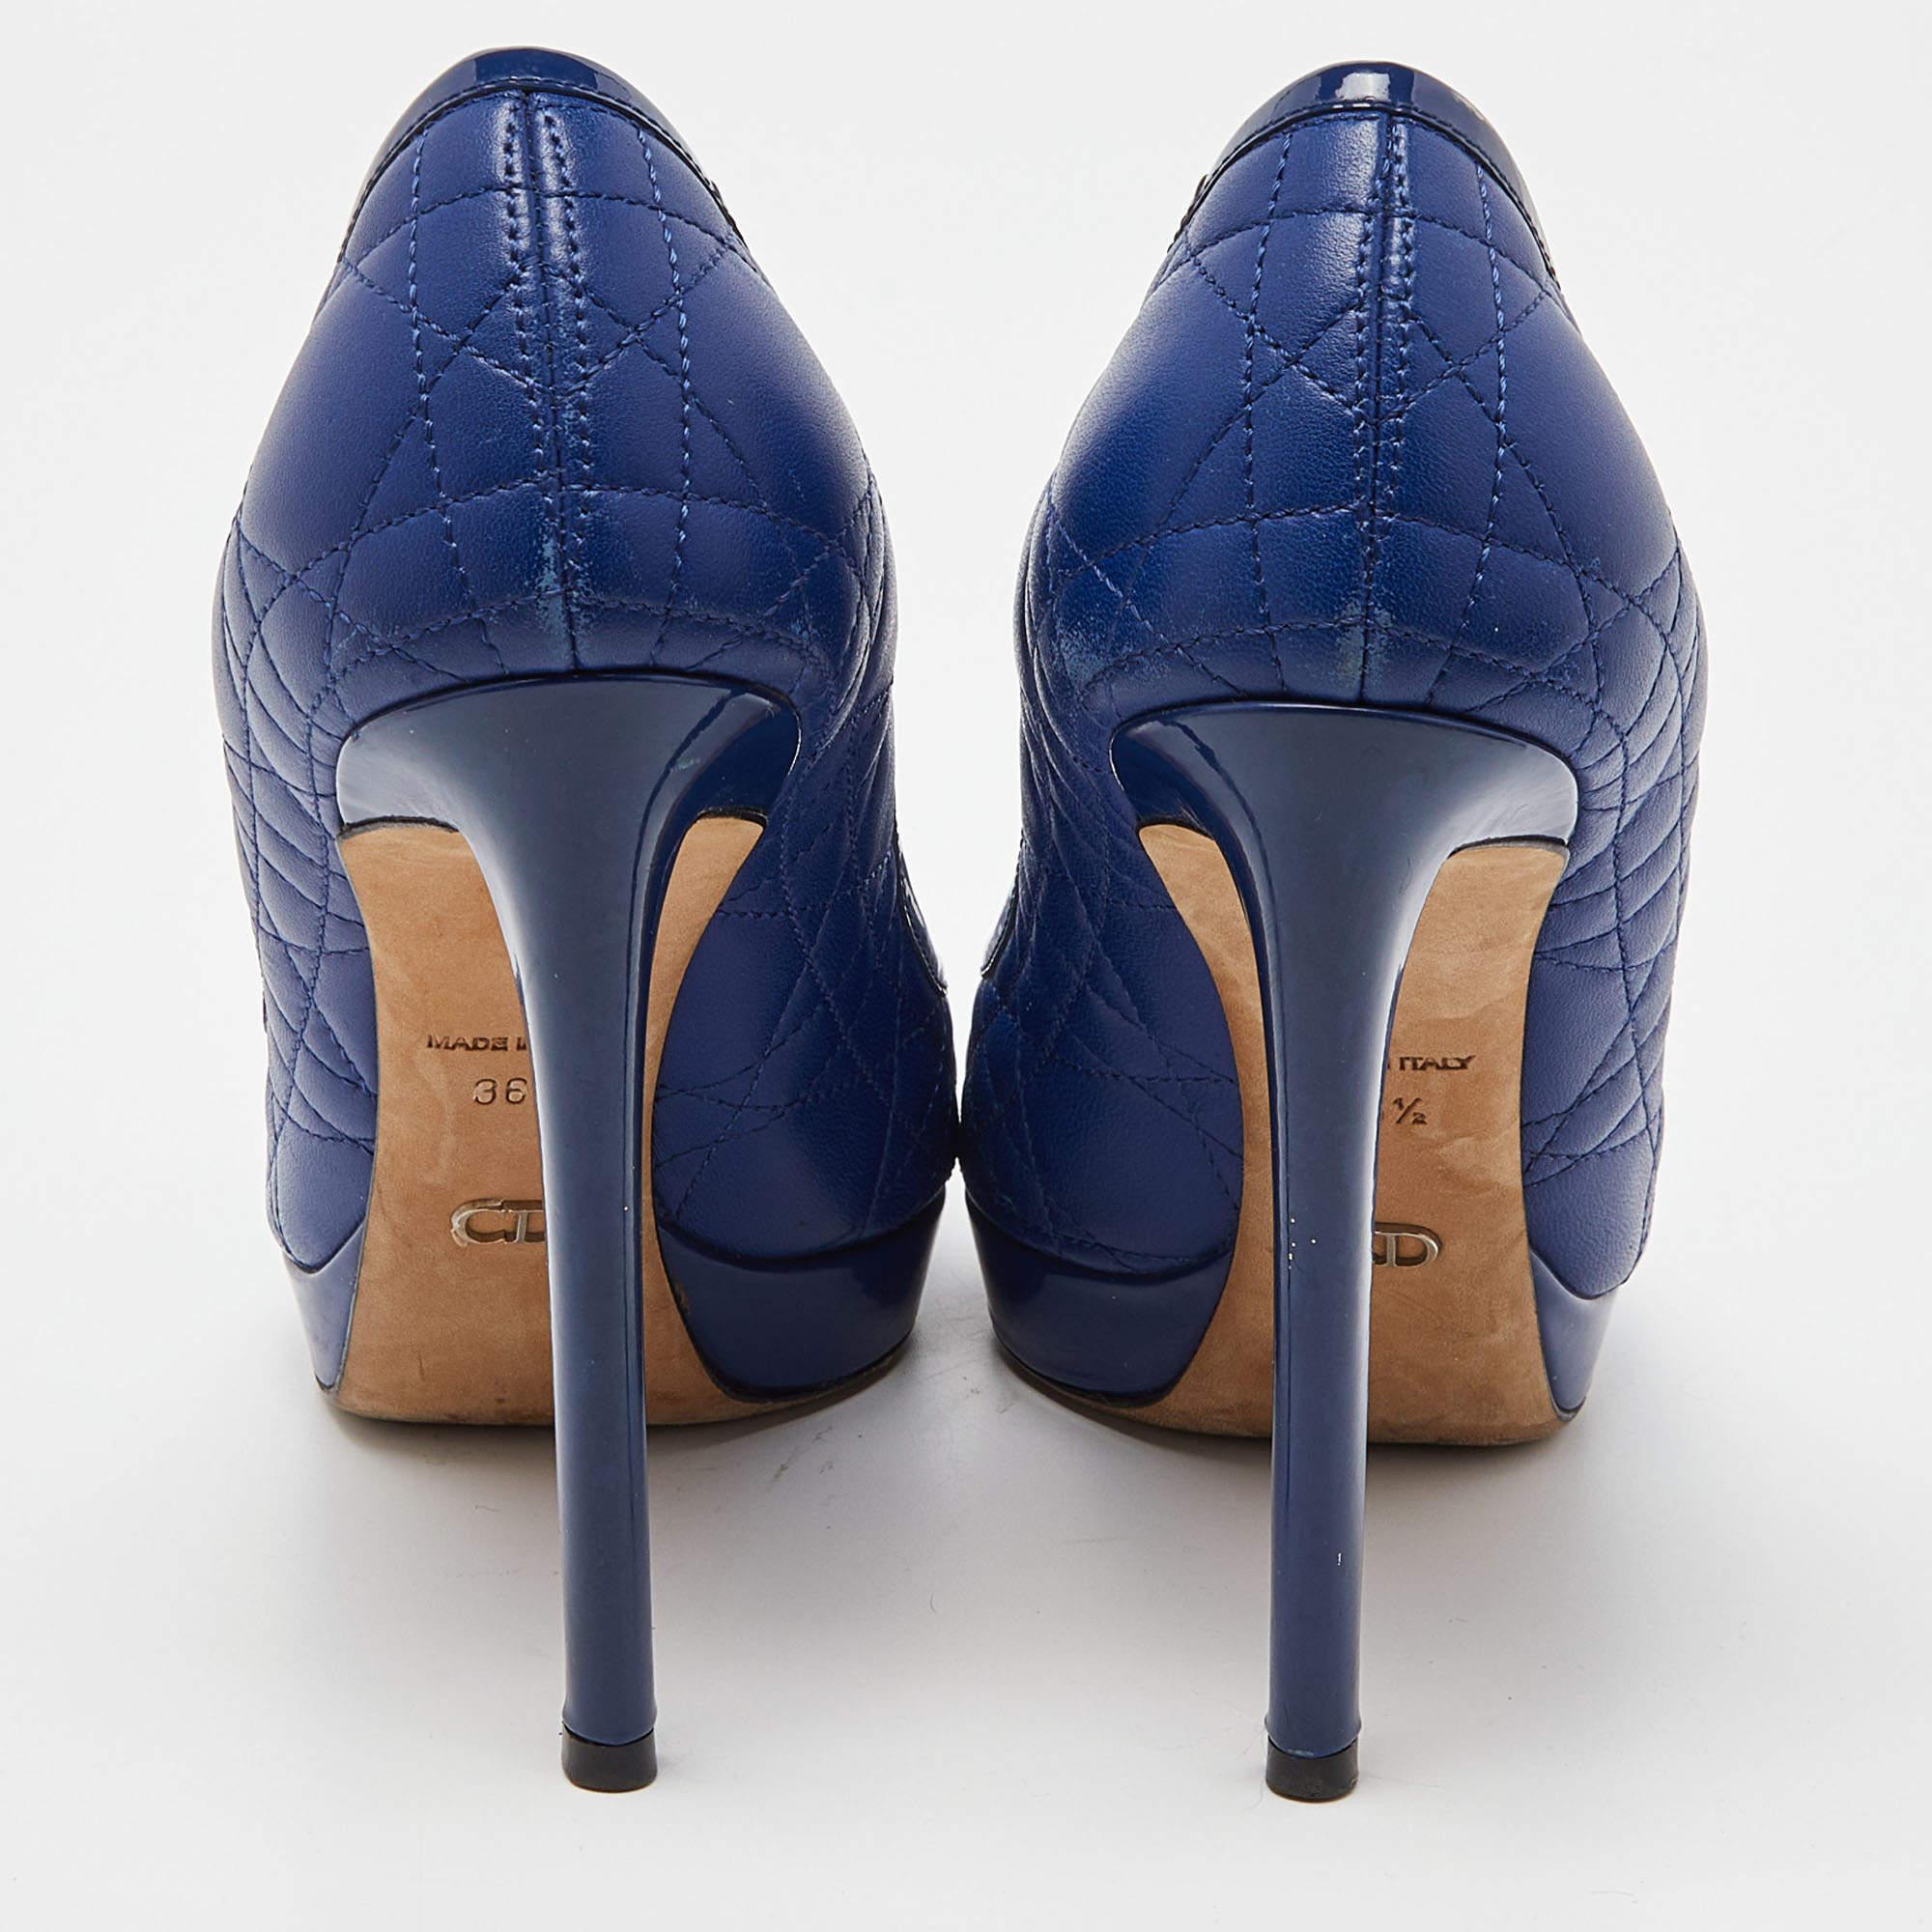 Dior Blue Cannage Leather and Patent Bow Peep Toe Platform Pumps Size 36.5 For Sale 3